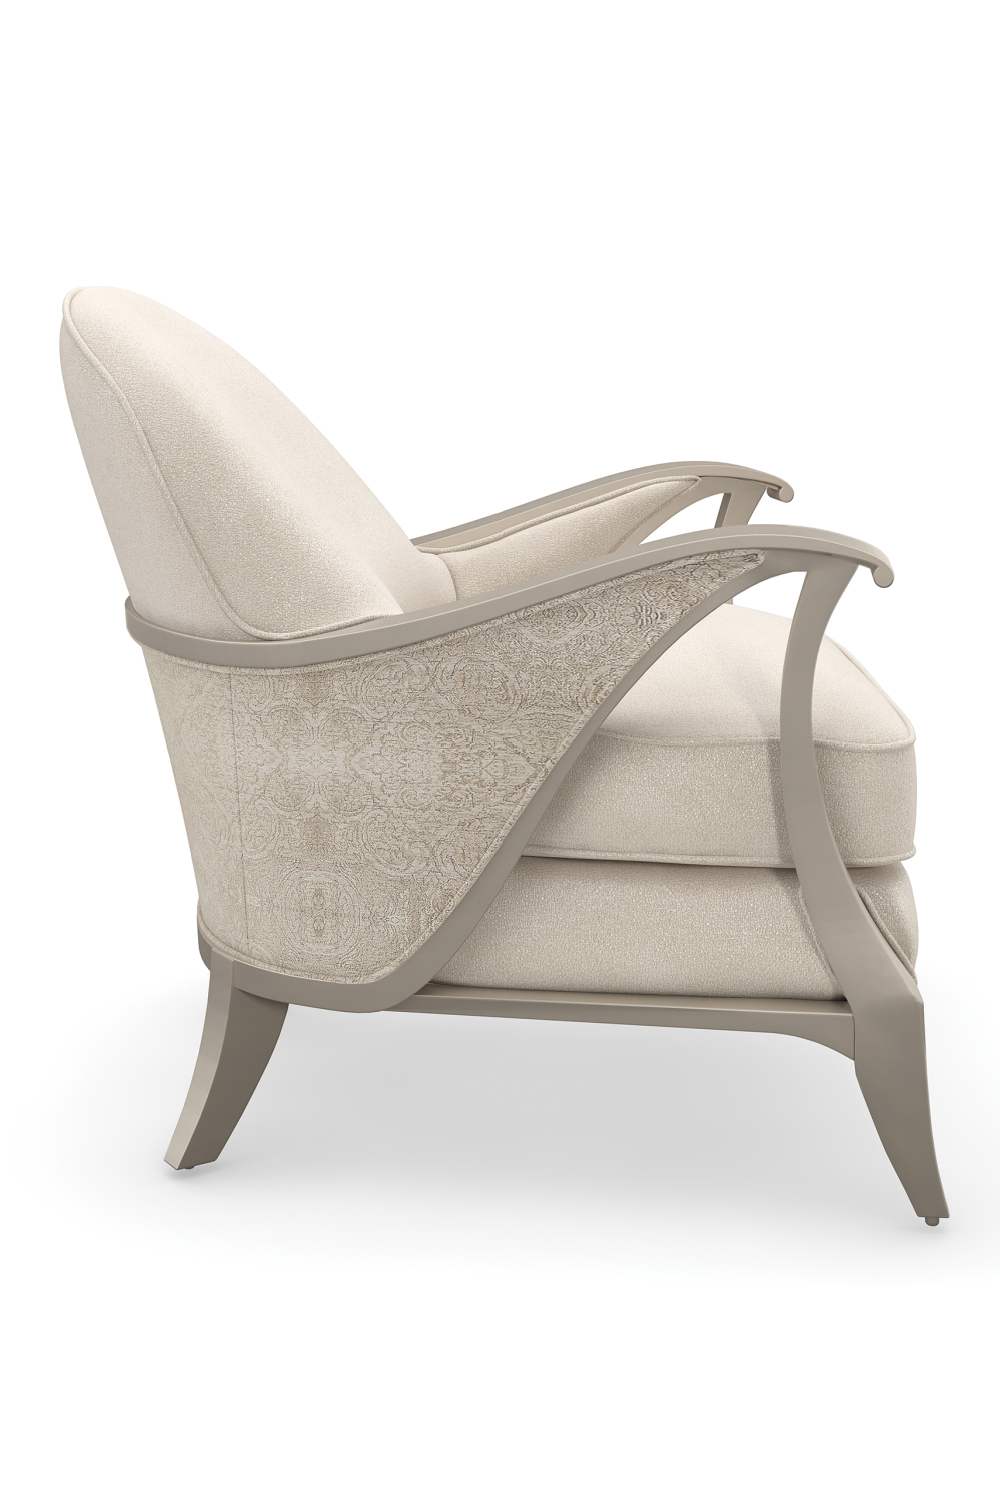 Beige Contemporary Lounge Chair | Caracole Curtsy | Oroa.com